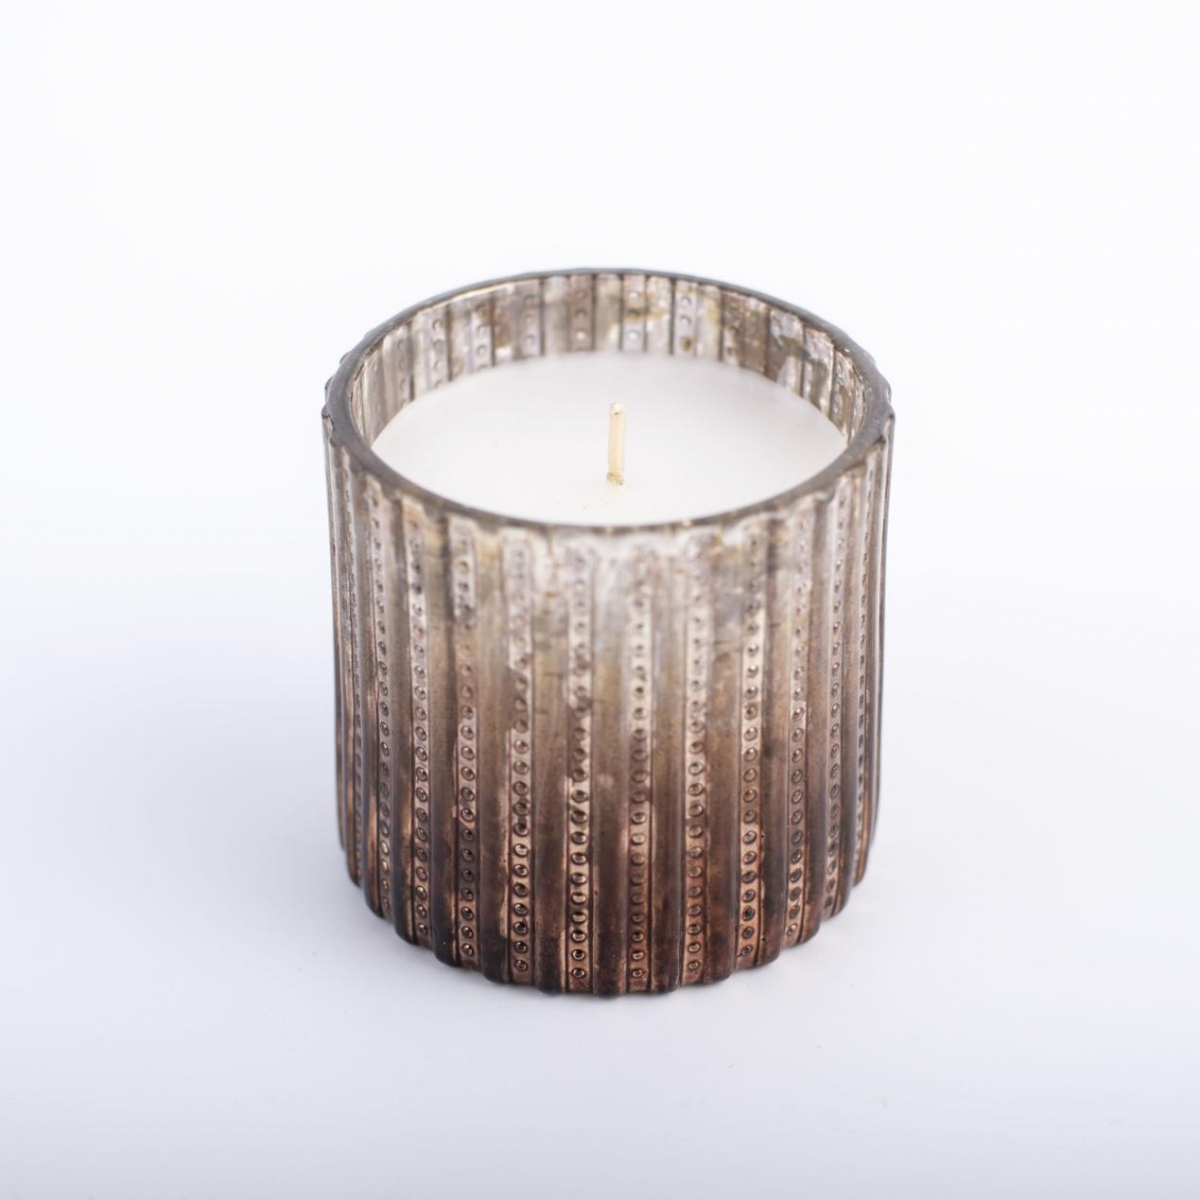 Aromatherapy Candles -Retro Candles ,Engraved Dot Stripe Candle Jar ,Vegan Candles ,Gradient Brown Glass Jar ,China Factory, Cheap Price-HOWCANDLE-Candles,Scented Candles,Aromatherapy Candles,Soy Candles,Vegan Candles,Jar Candles,Pillar Candles,Candle Gift Sets,Essential Oils,Reed Diffuser,Candle Holder,